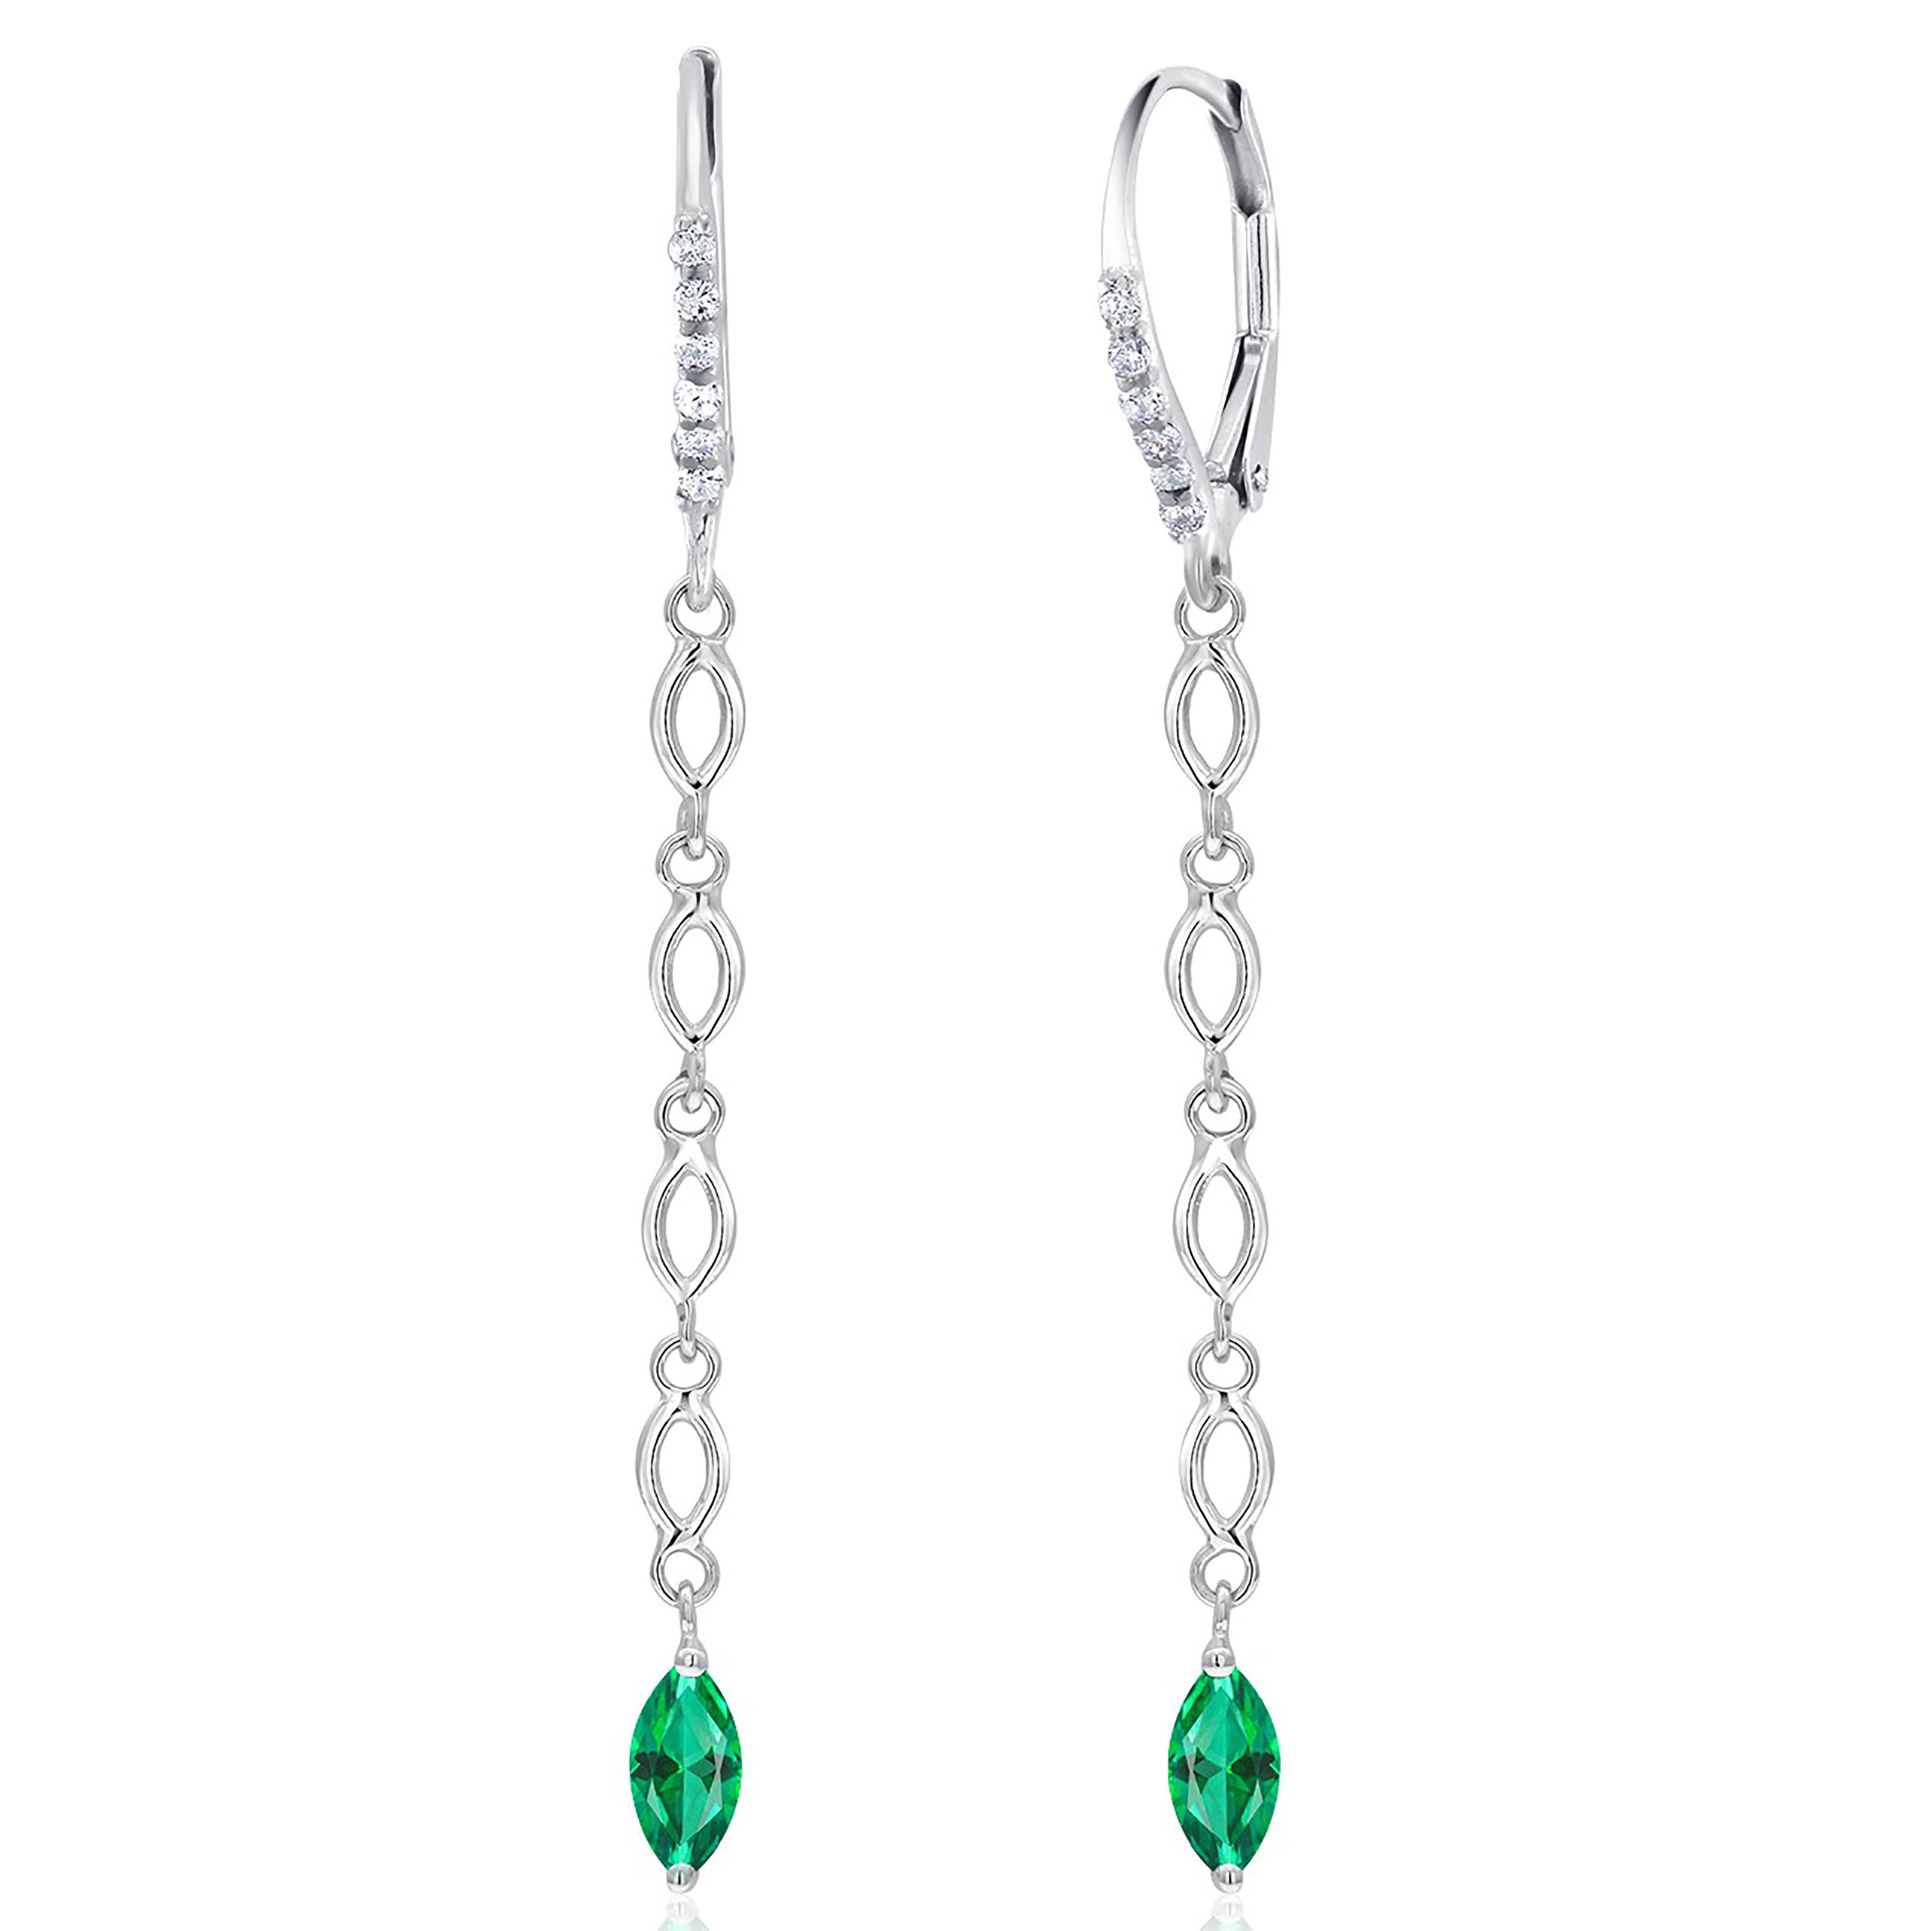 Fourteen karats white gold diamond and emerald drop hoop earrings 
Two marquise emeralds weighing 0.90 carat
Diamond hoops weighing 0.25
Emerald quality bright and vivid green
New Earrings
Handmade in the USA
One of a kind earrings 
Fourteen karat